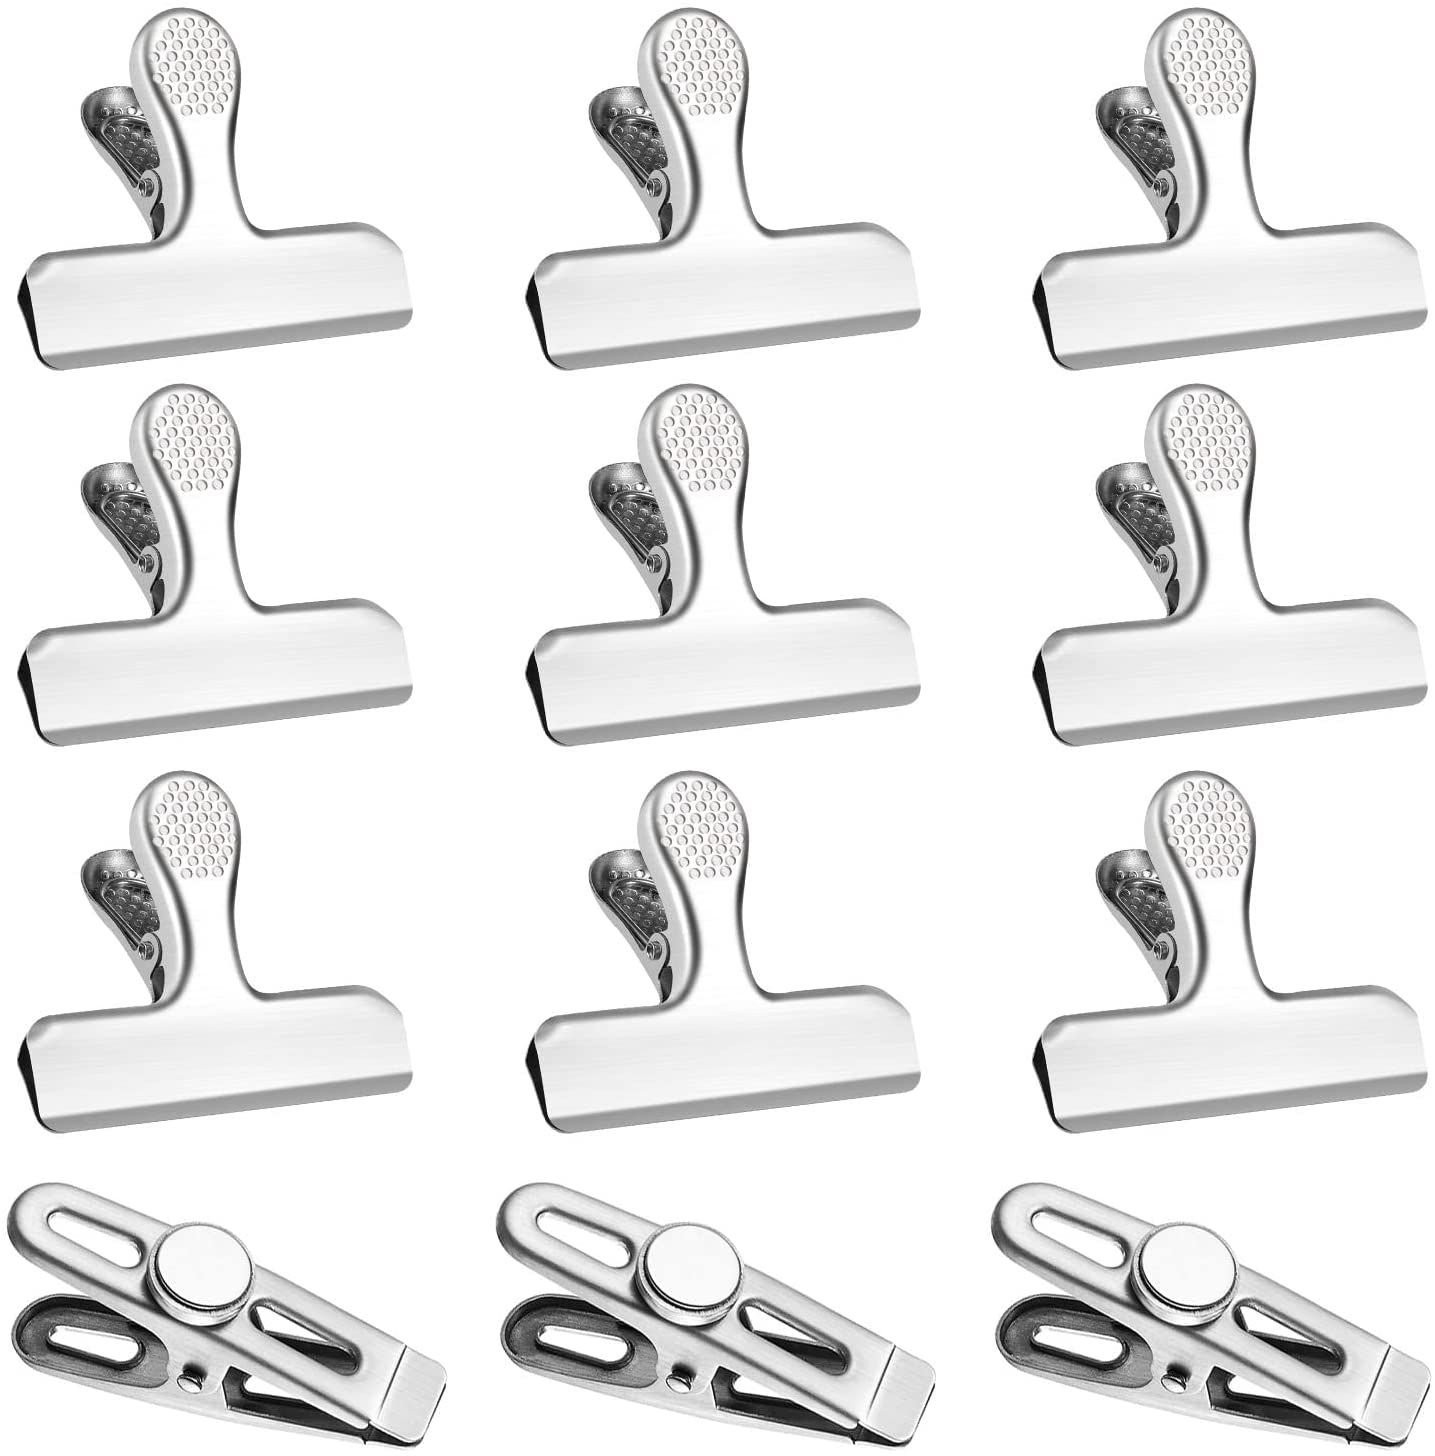 LEYOSOV Stainless Steel Magnetic Air Tight Bag Clips, 9-Pack